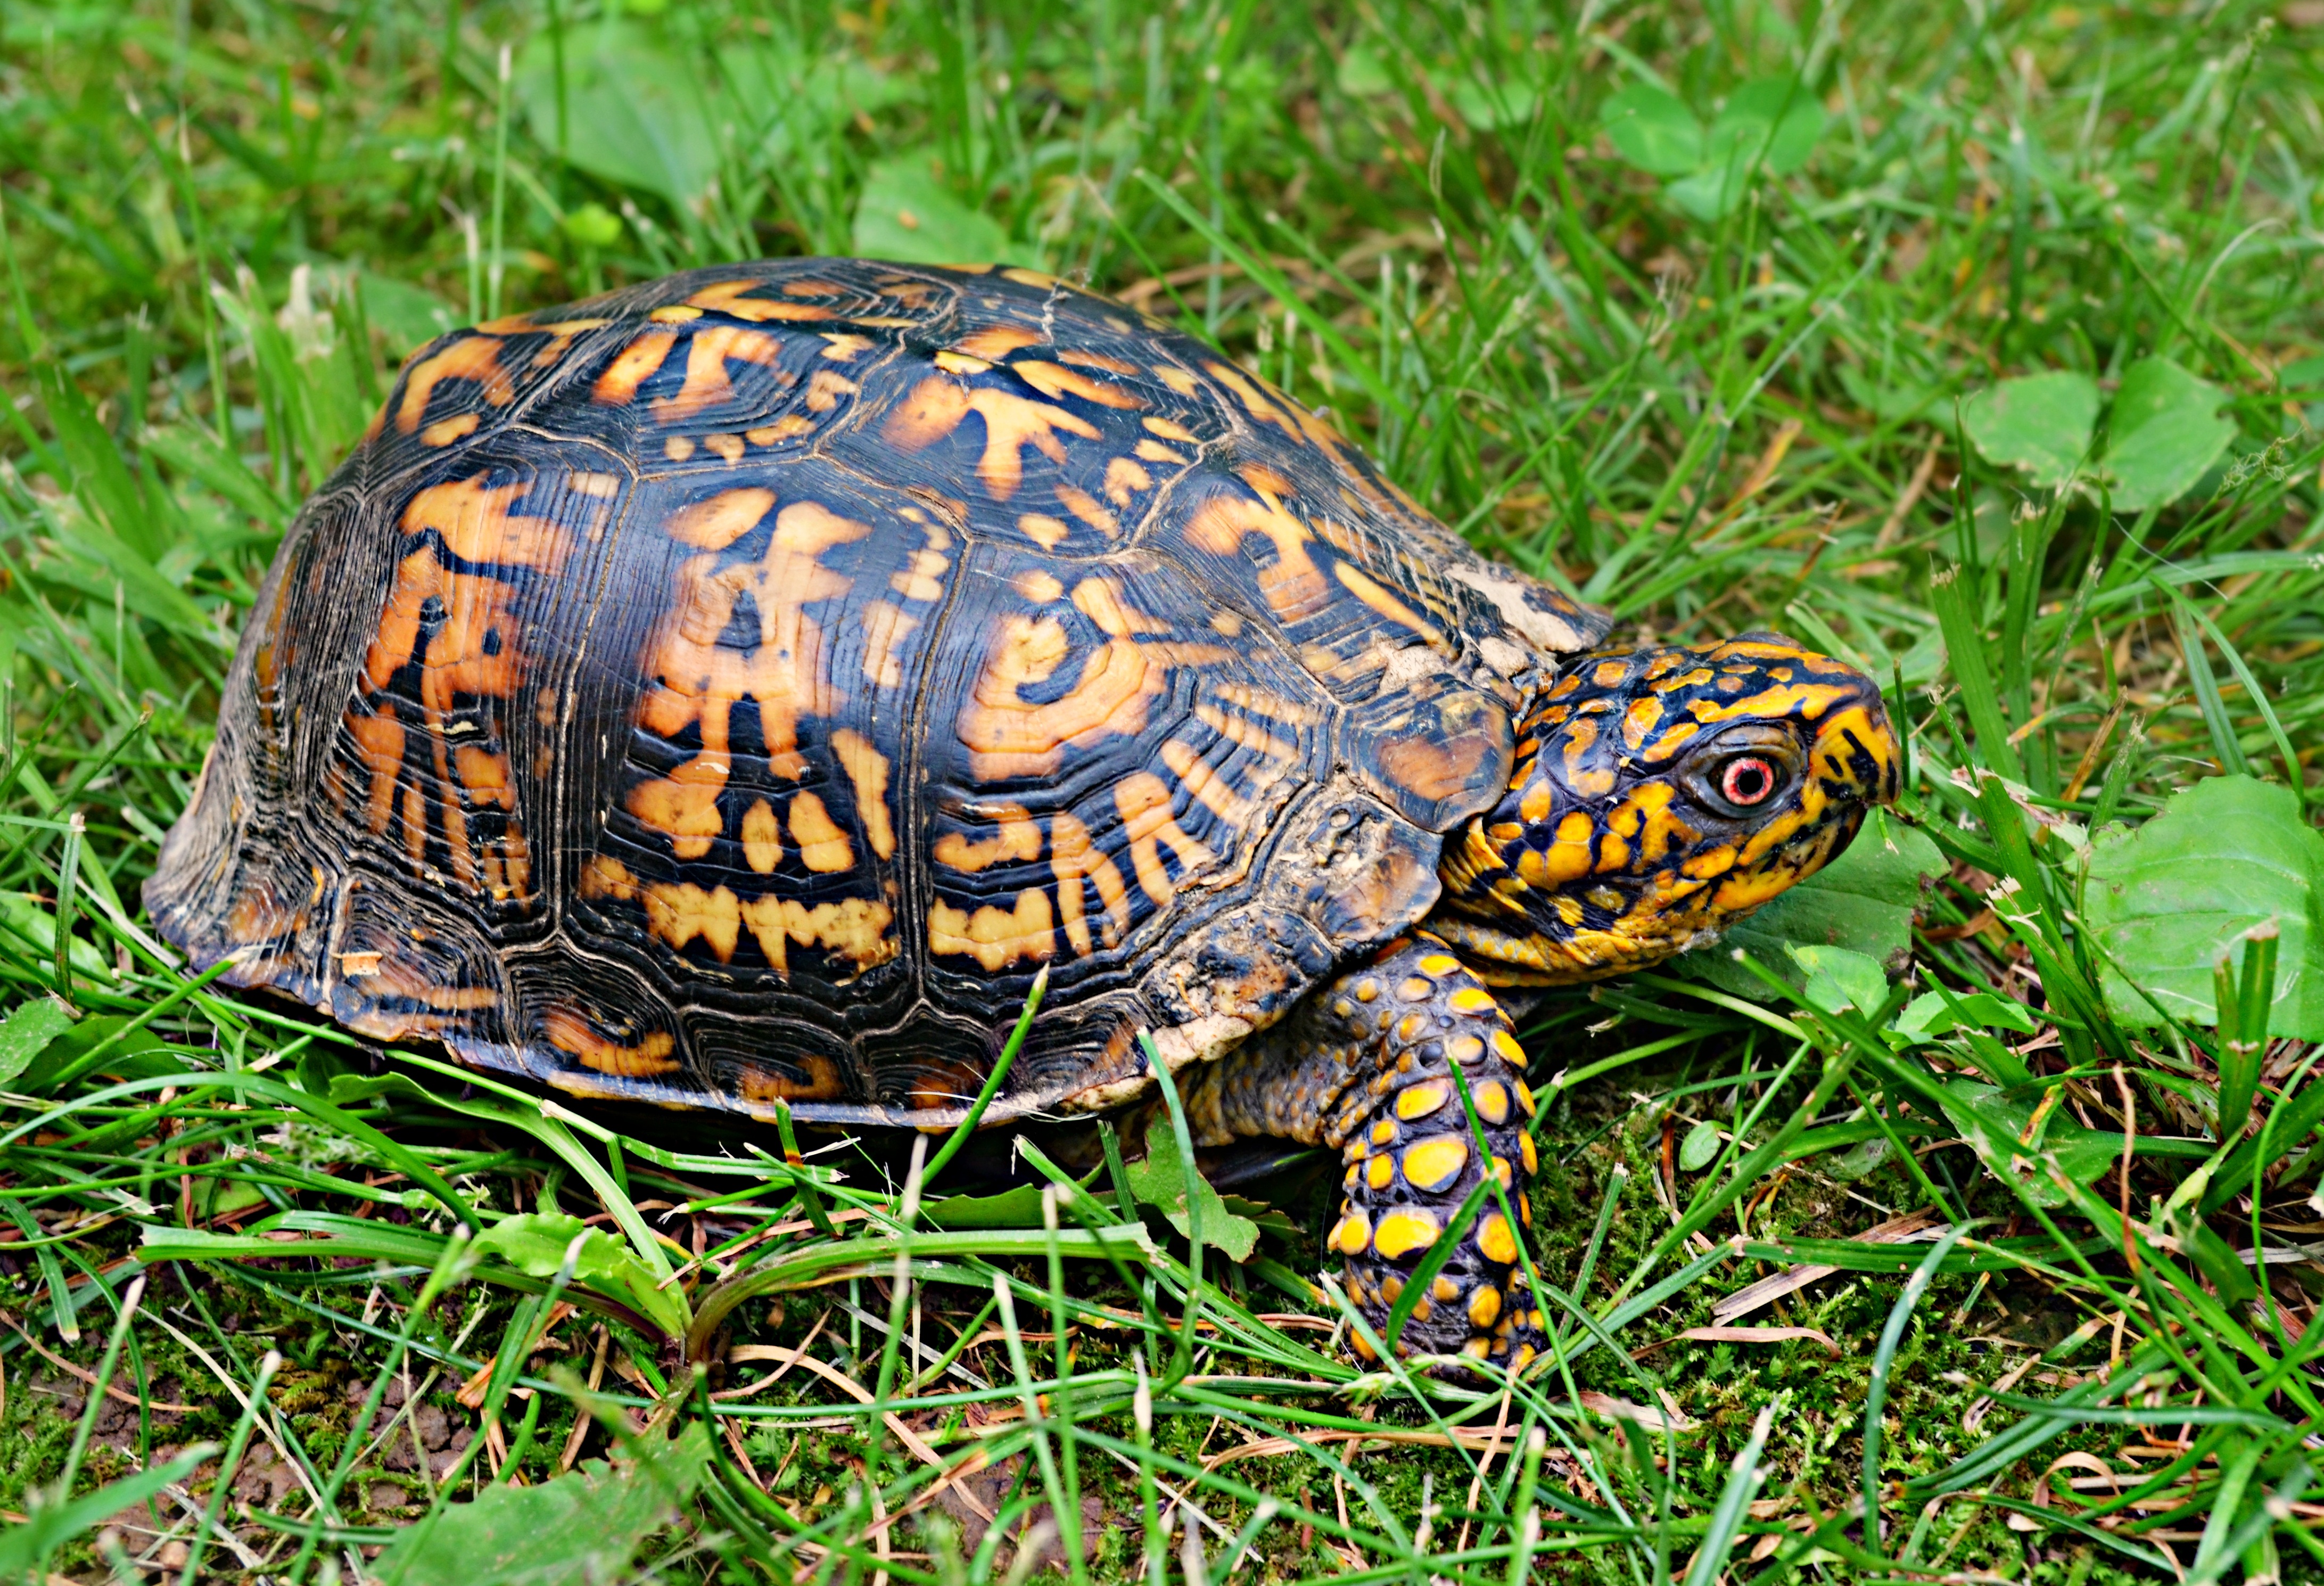 118065 download wallpaper animals, grass, carapace, shell, turtle screensavers and pictures for free